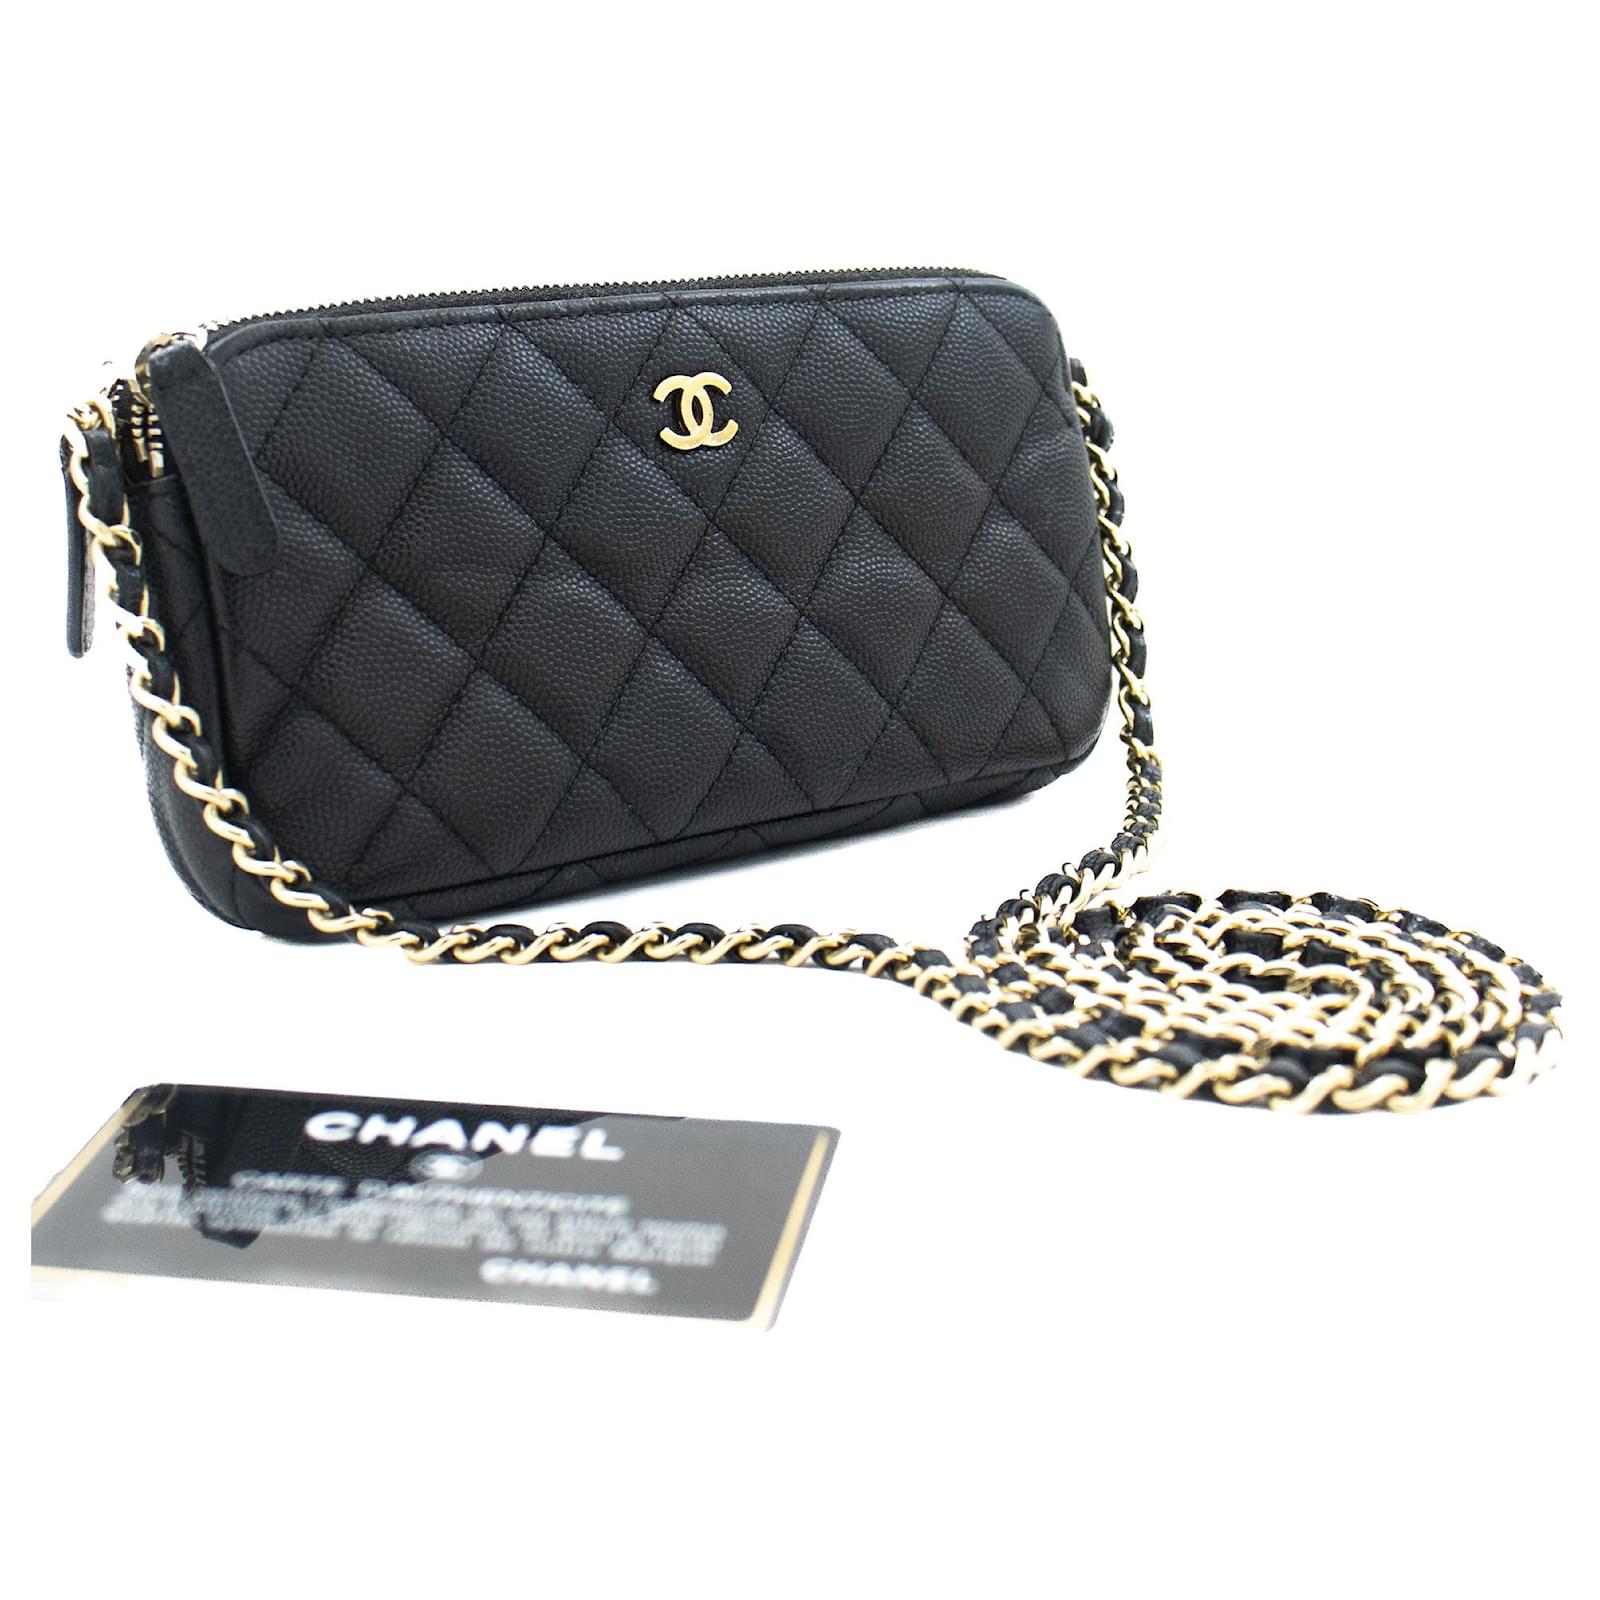 CHANEL Caviar Wallet On Chain WOC lined Zip Chain Shoulder Bag